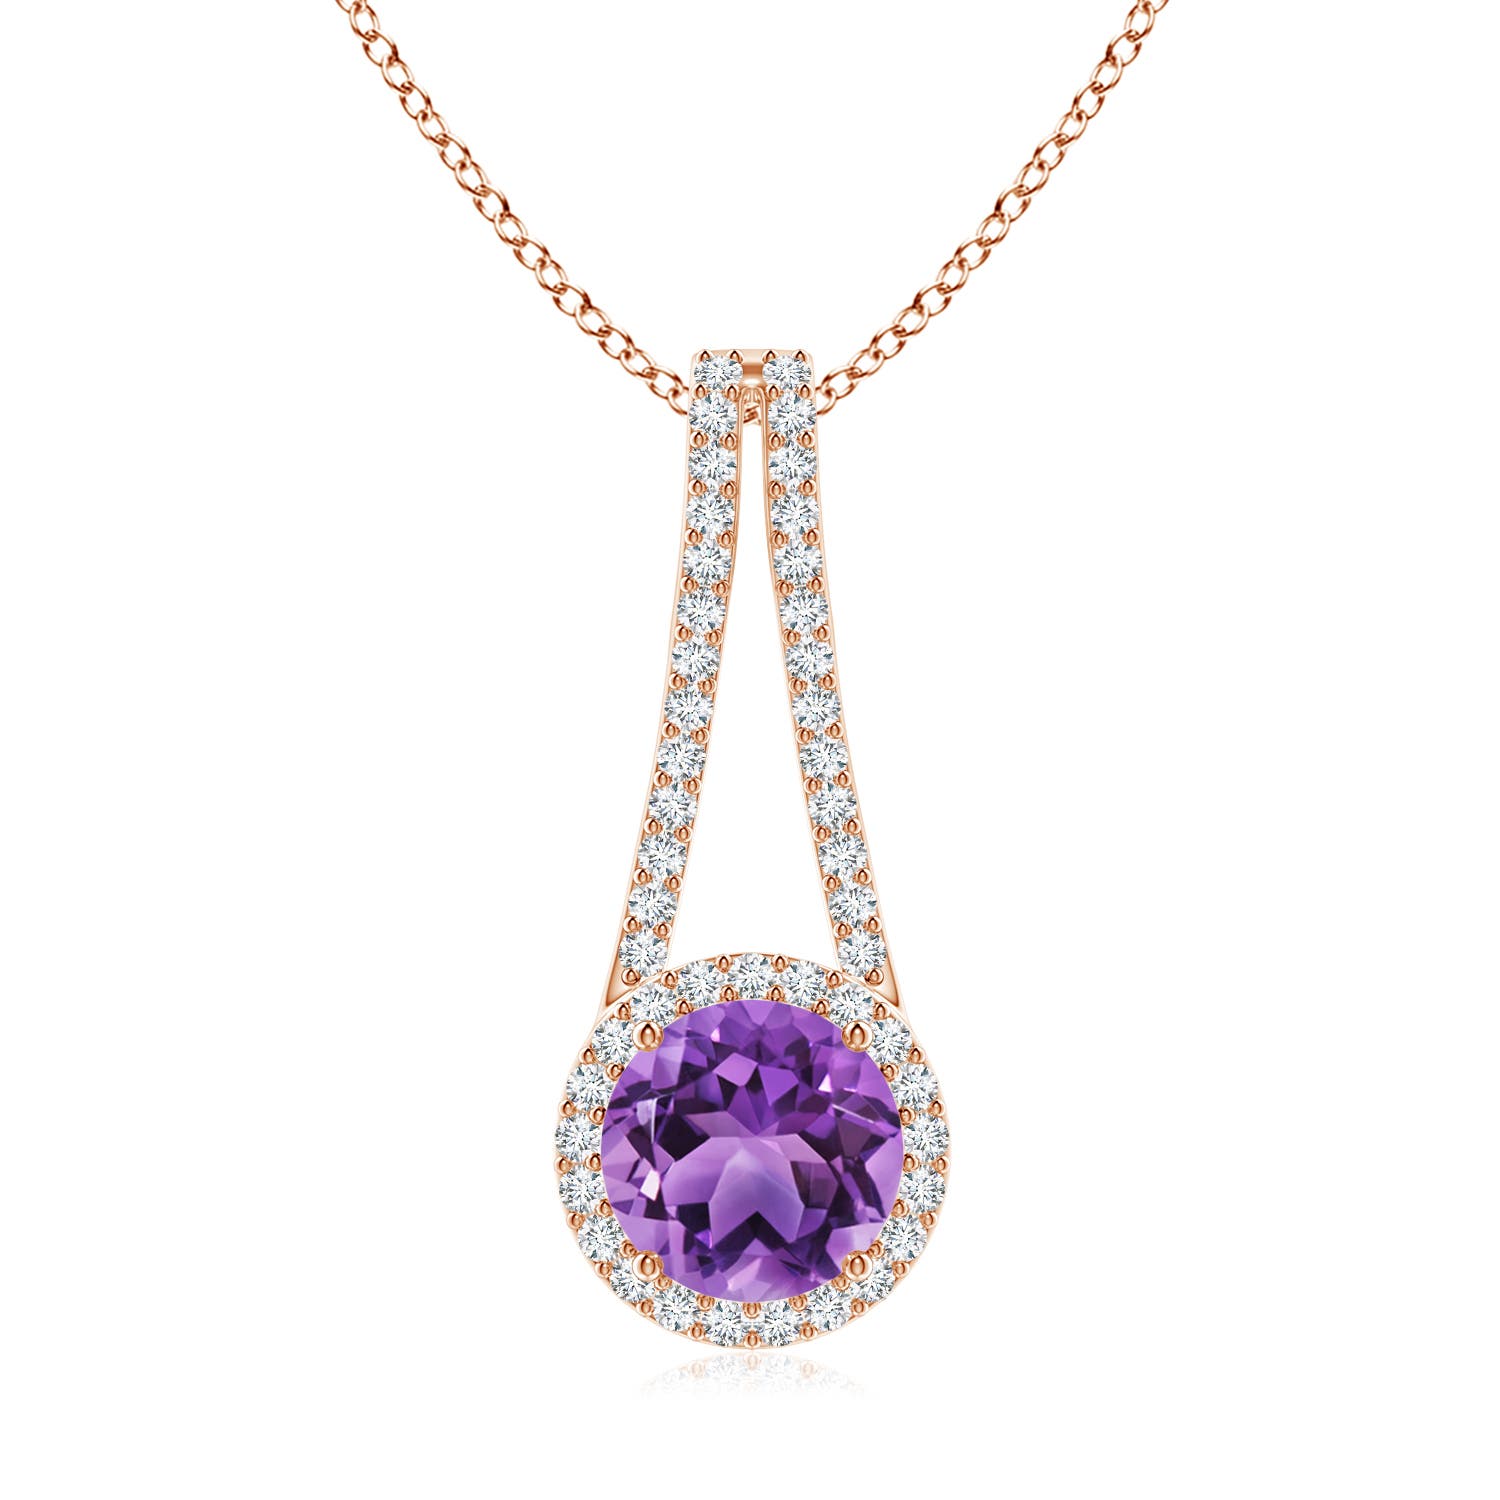 AA - Amethyst / 2.08 CT / 14 KT Rose Gold